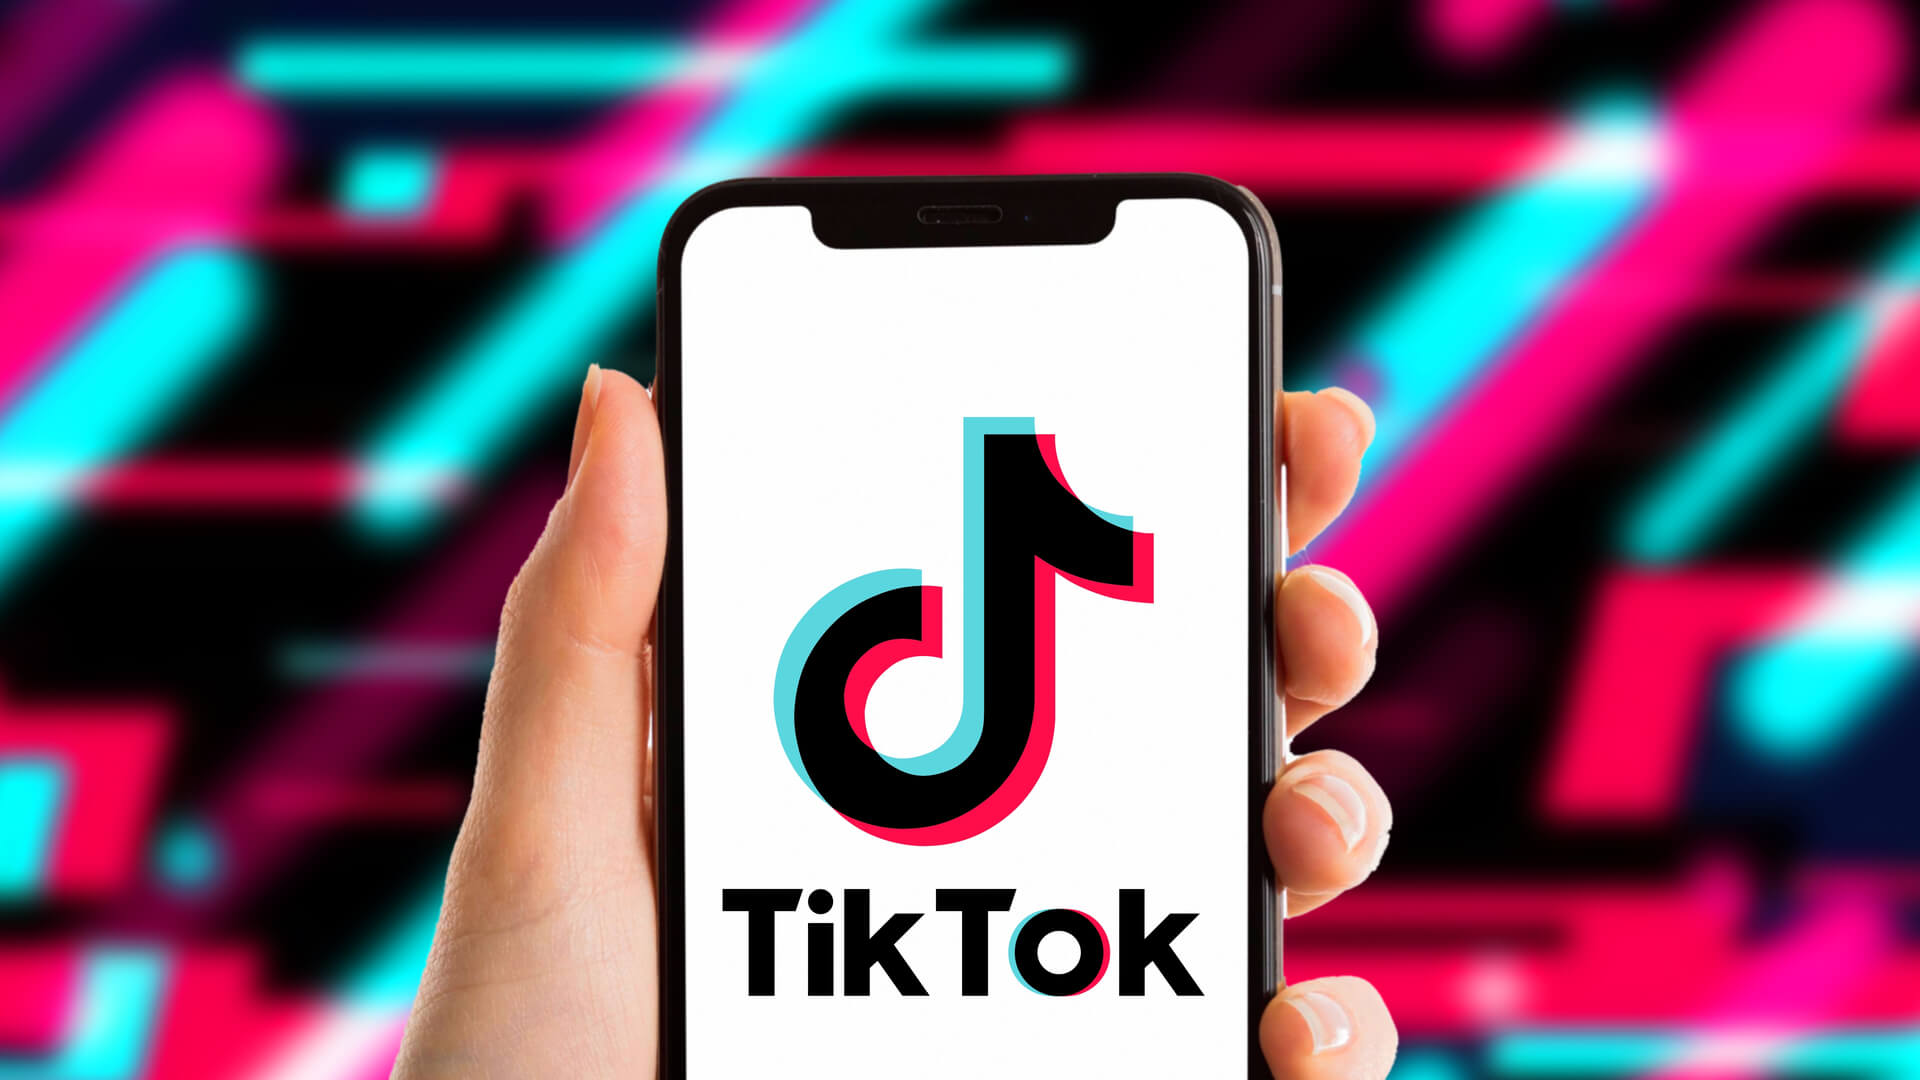 Due to security concerns, Montana becomes the first US state to ban TikTok